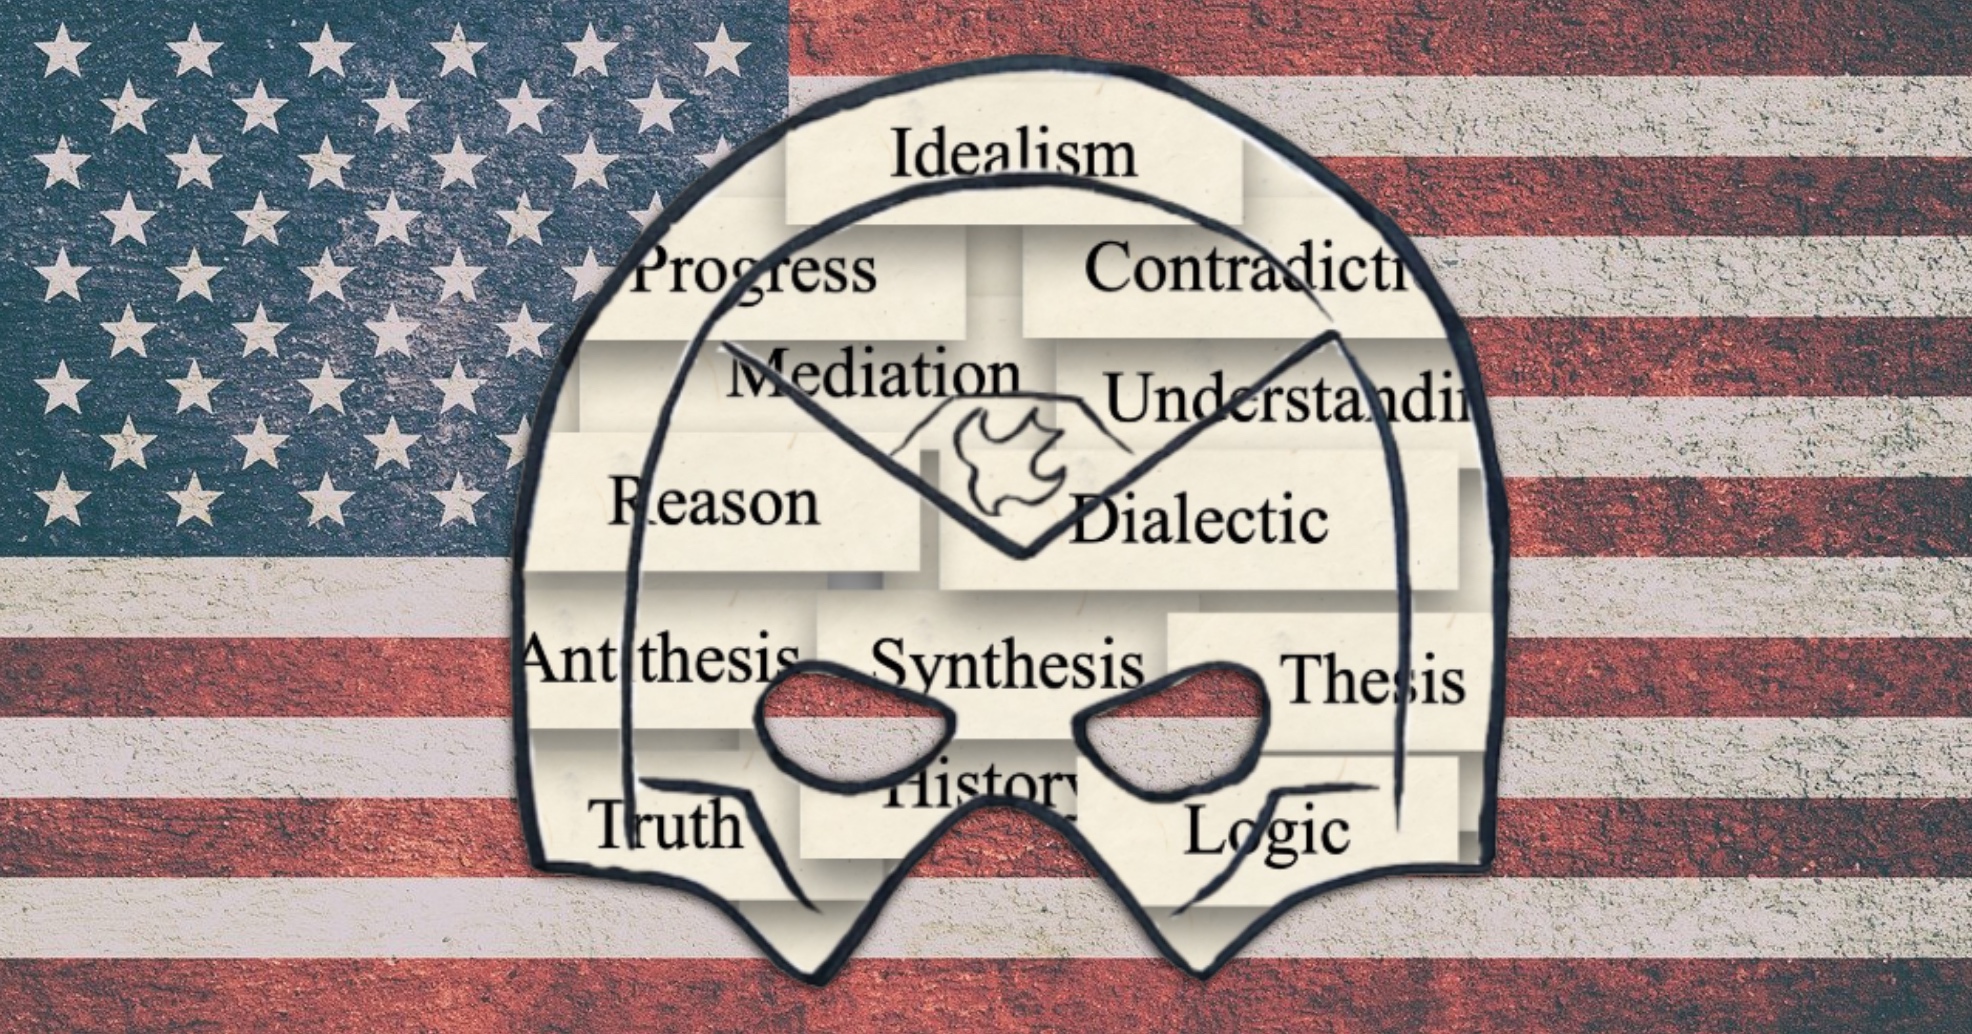 Image of the Peacemaker helmet logo on an American flag